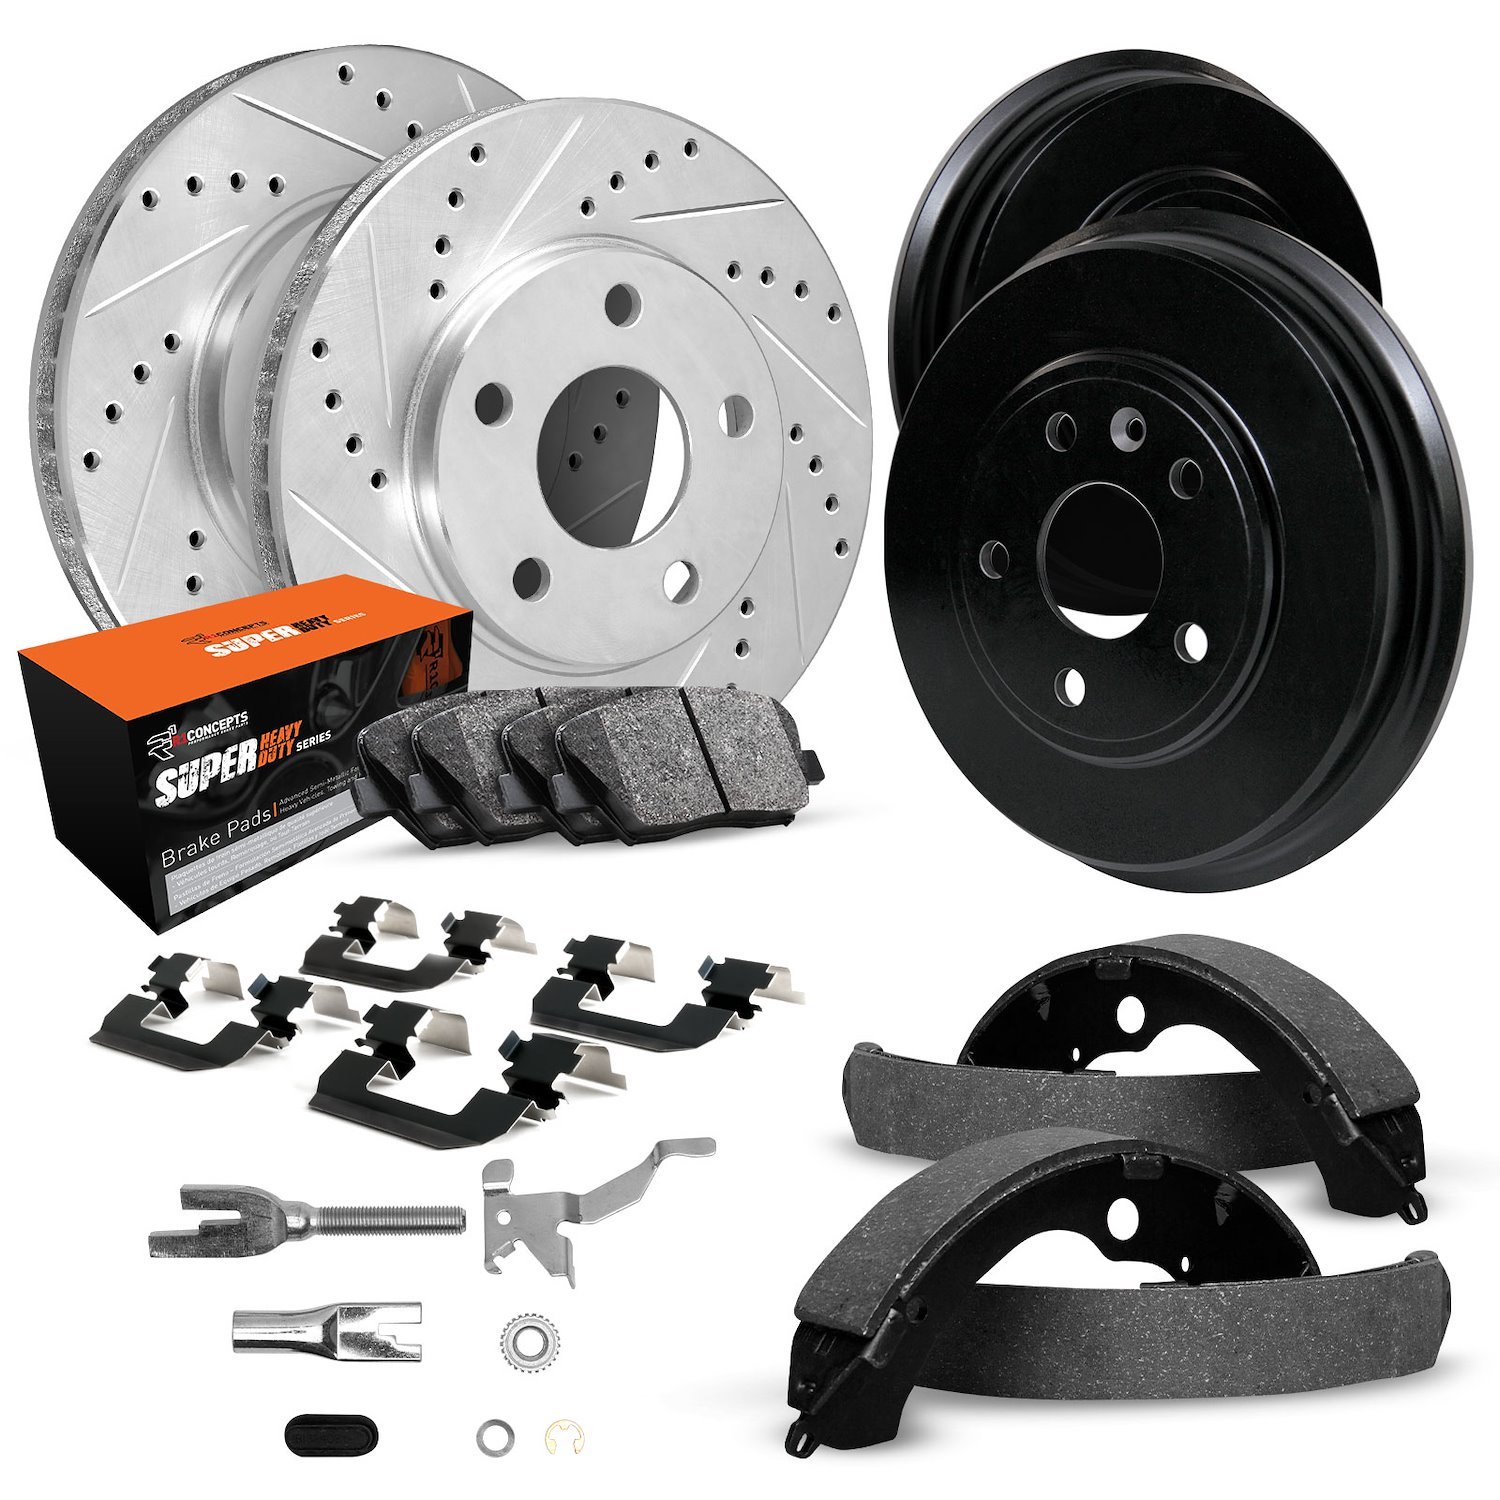 E-Line Drilled/Slotted Silver Rotor & Drum Set w/Super-Duty Pads, Shoes/Hardware/Adjusters, 2003-2004 Mopar